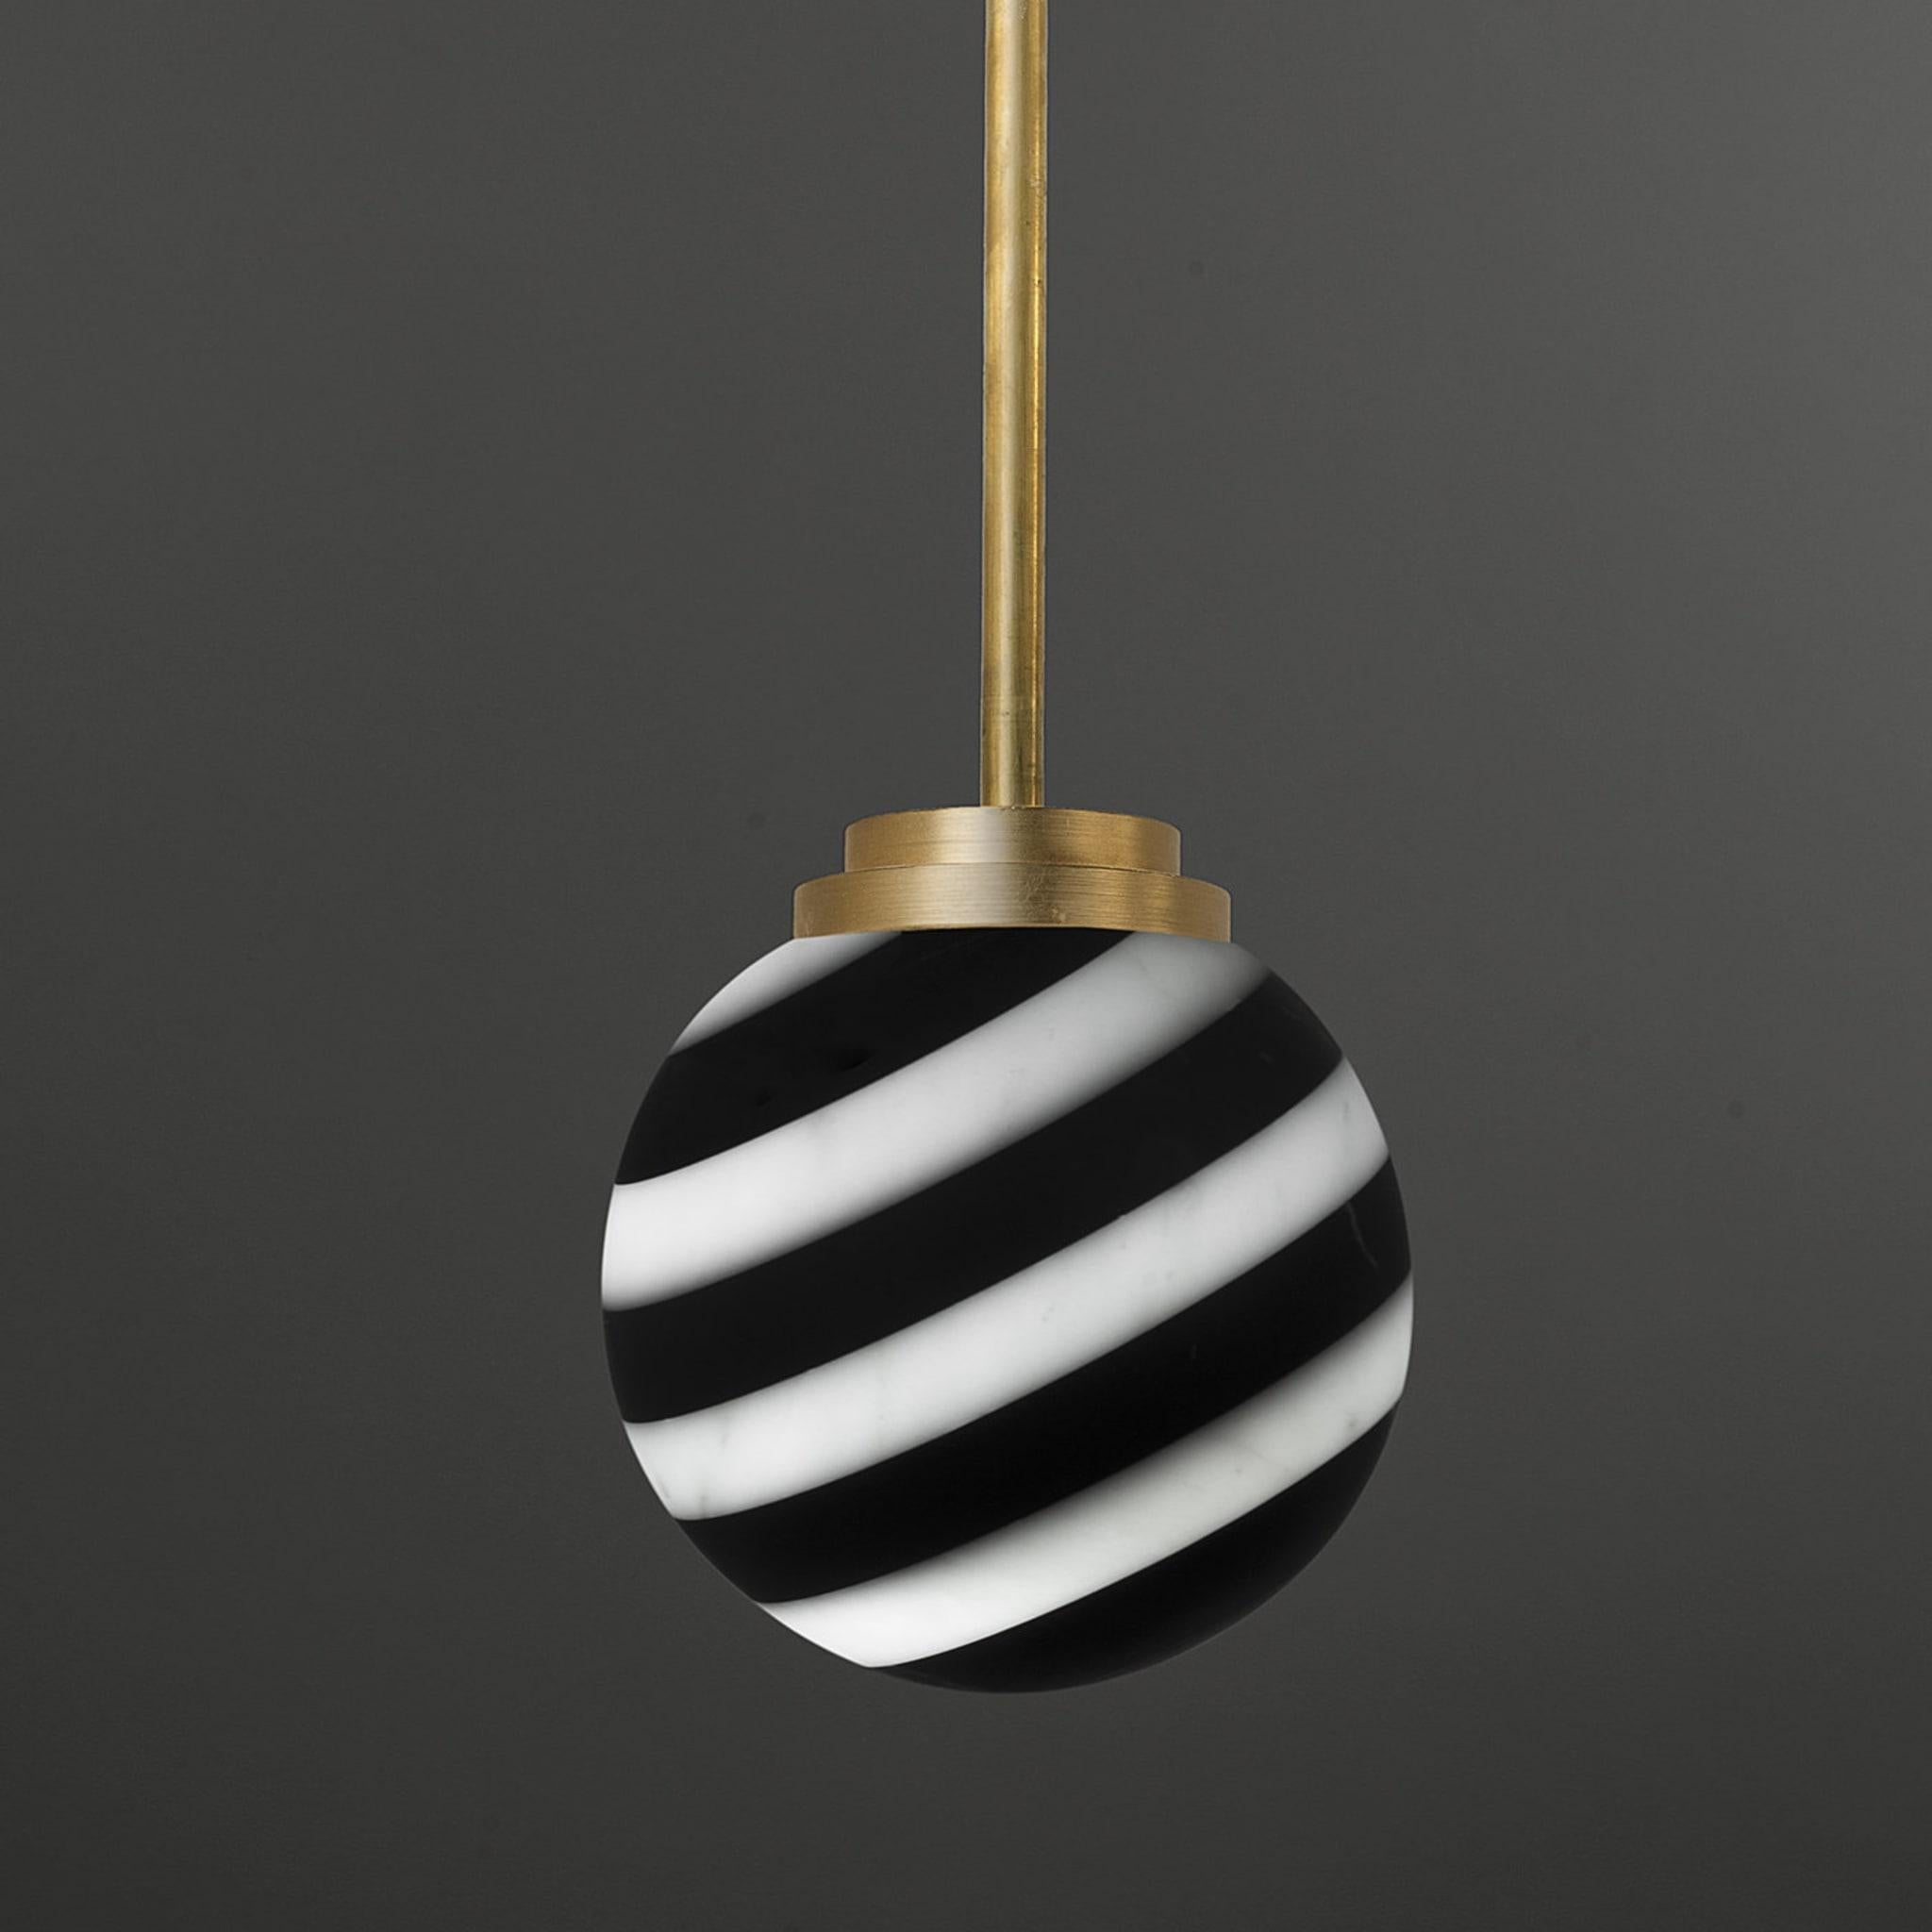 An ode to minimalist design sensibility and architectural rigor, this captivating pendant lamp by Bethan Gray draws inspiration from the 12th-century Cathedral in Siena. The orb-shaped pendant boasts a striped black-and-white pattern crafted using